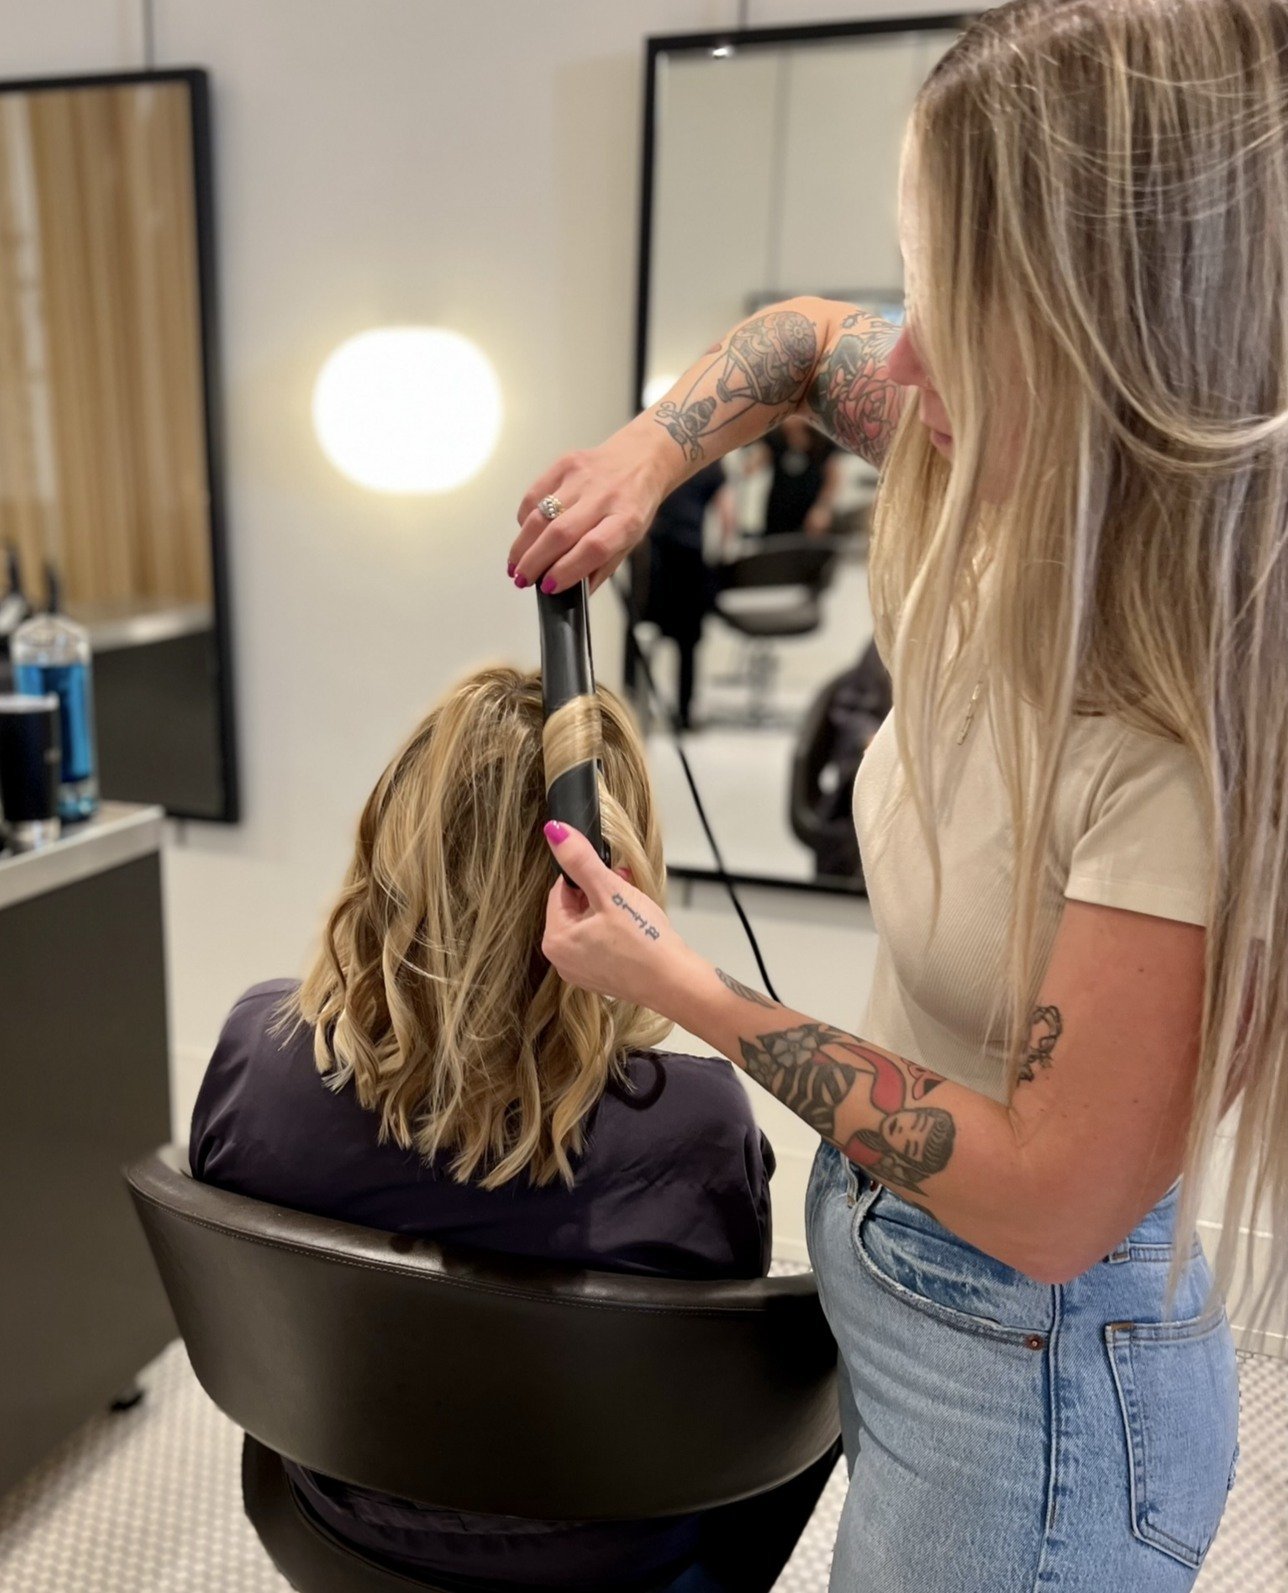 Our stylists work with you to achieve a look that complements your personality and lifestyle. Pictured: @jessie_l_c⁠
⁠
▪️ Book your next consultation/appointment today! Click &ldquo;contact&rdquo; in our bio!⁠
▪️ Tag us in your looks! #michaelandmich